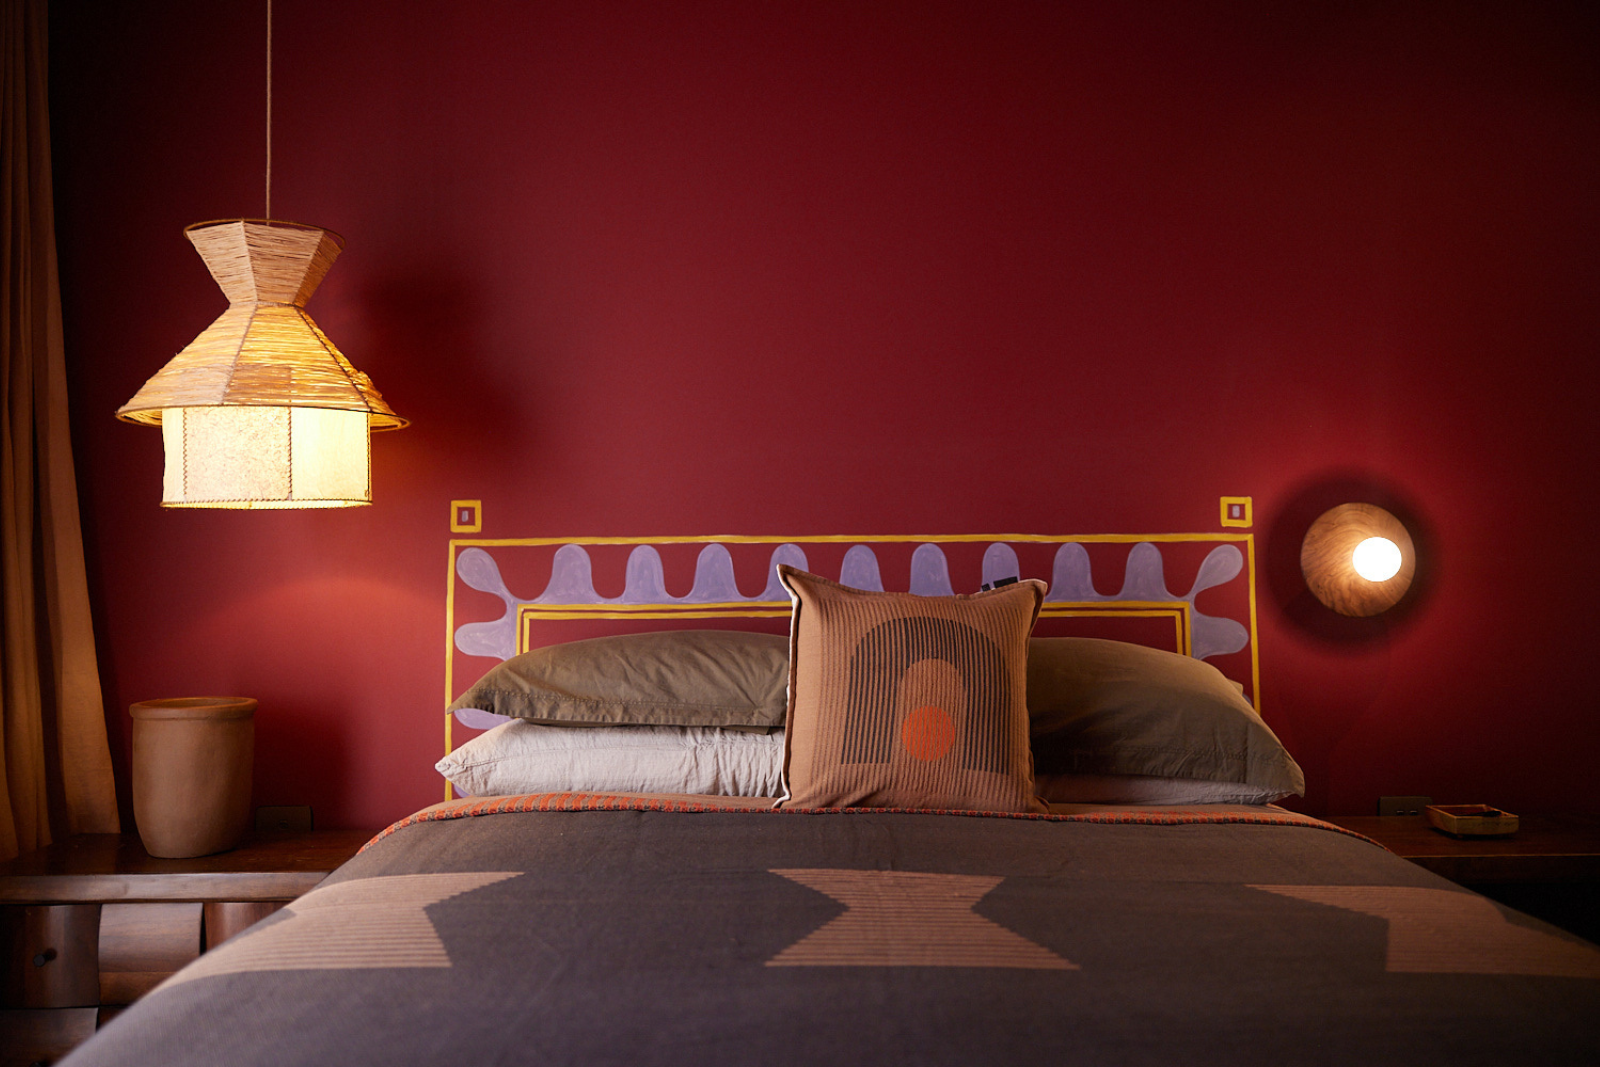 Queen Bed with aztec patterned cushion and throw. Room has dark red wall and golden lampshade on left. Room is very moody